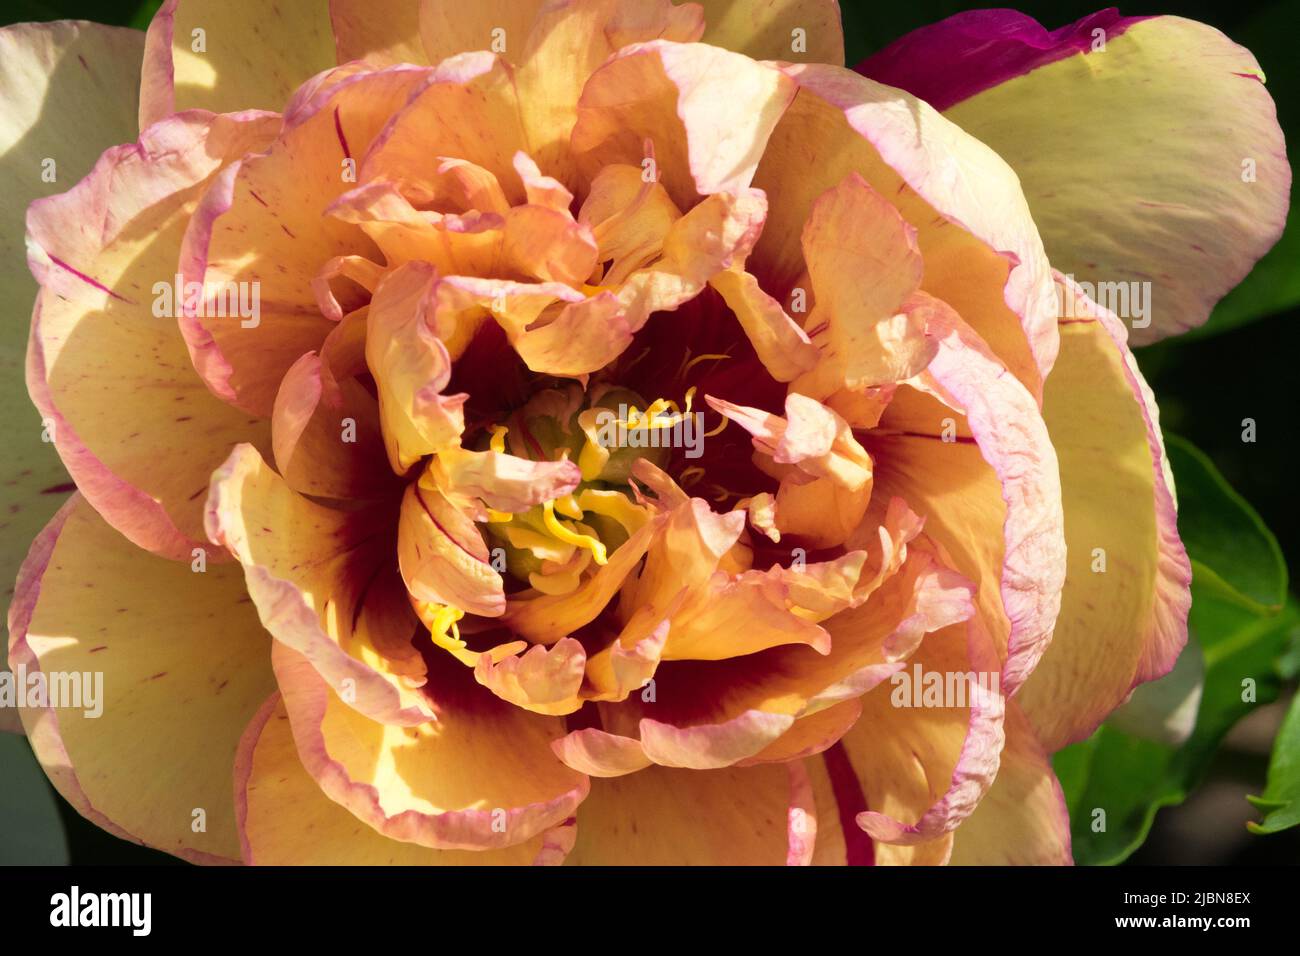 Attractive Single Flower Itoh Peony 'Callies Memory' Peony Intersectional Paeonia Large Bloom Flowering Blossom Paeonia 'Callies Memory' Hybrid Stock Photo